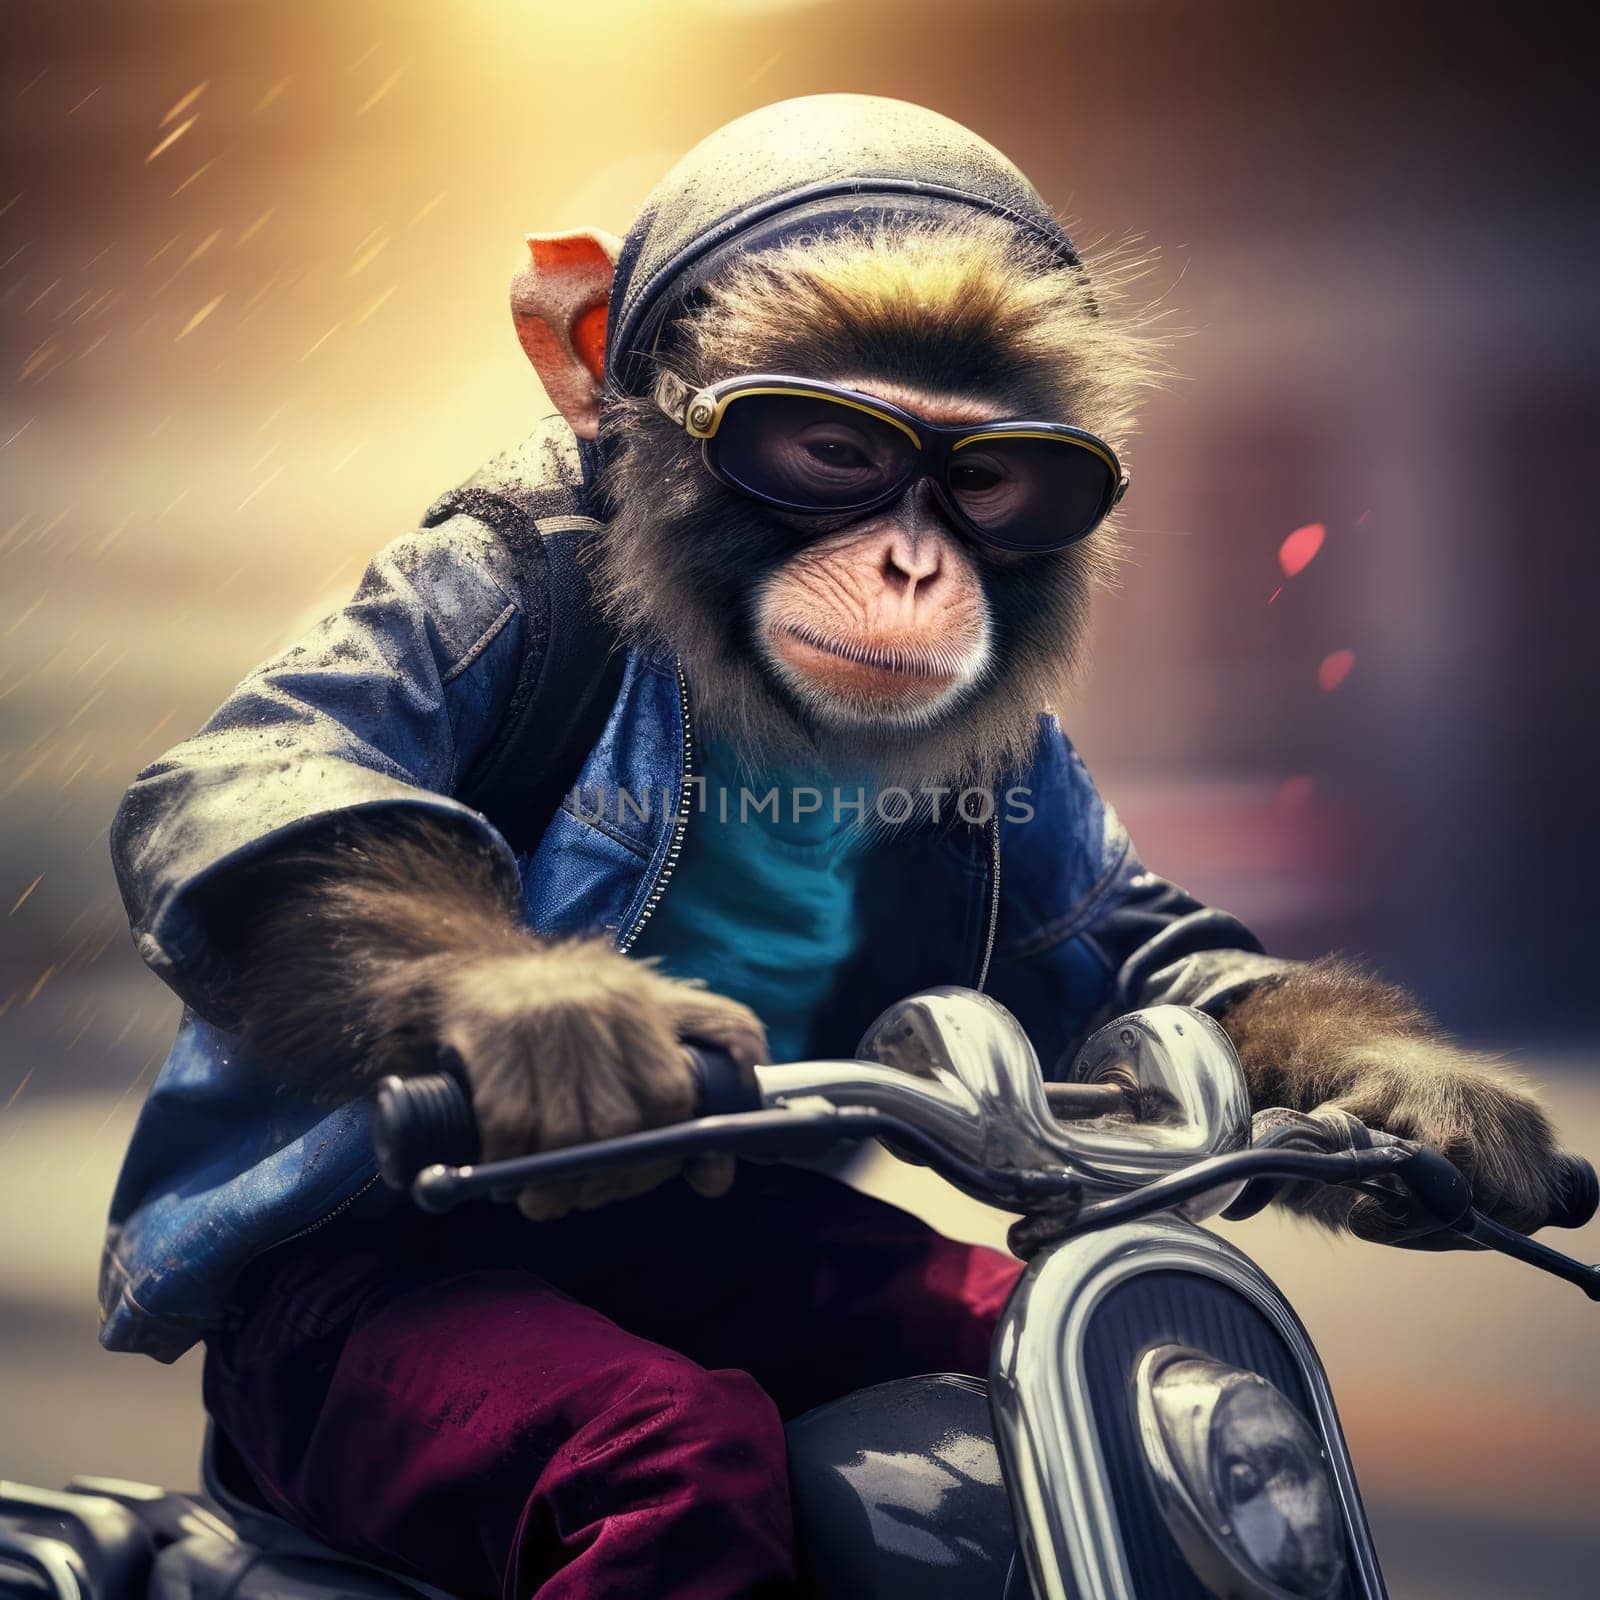 A monkey rides a motorcycle. The concept of riding a motorcycle